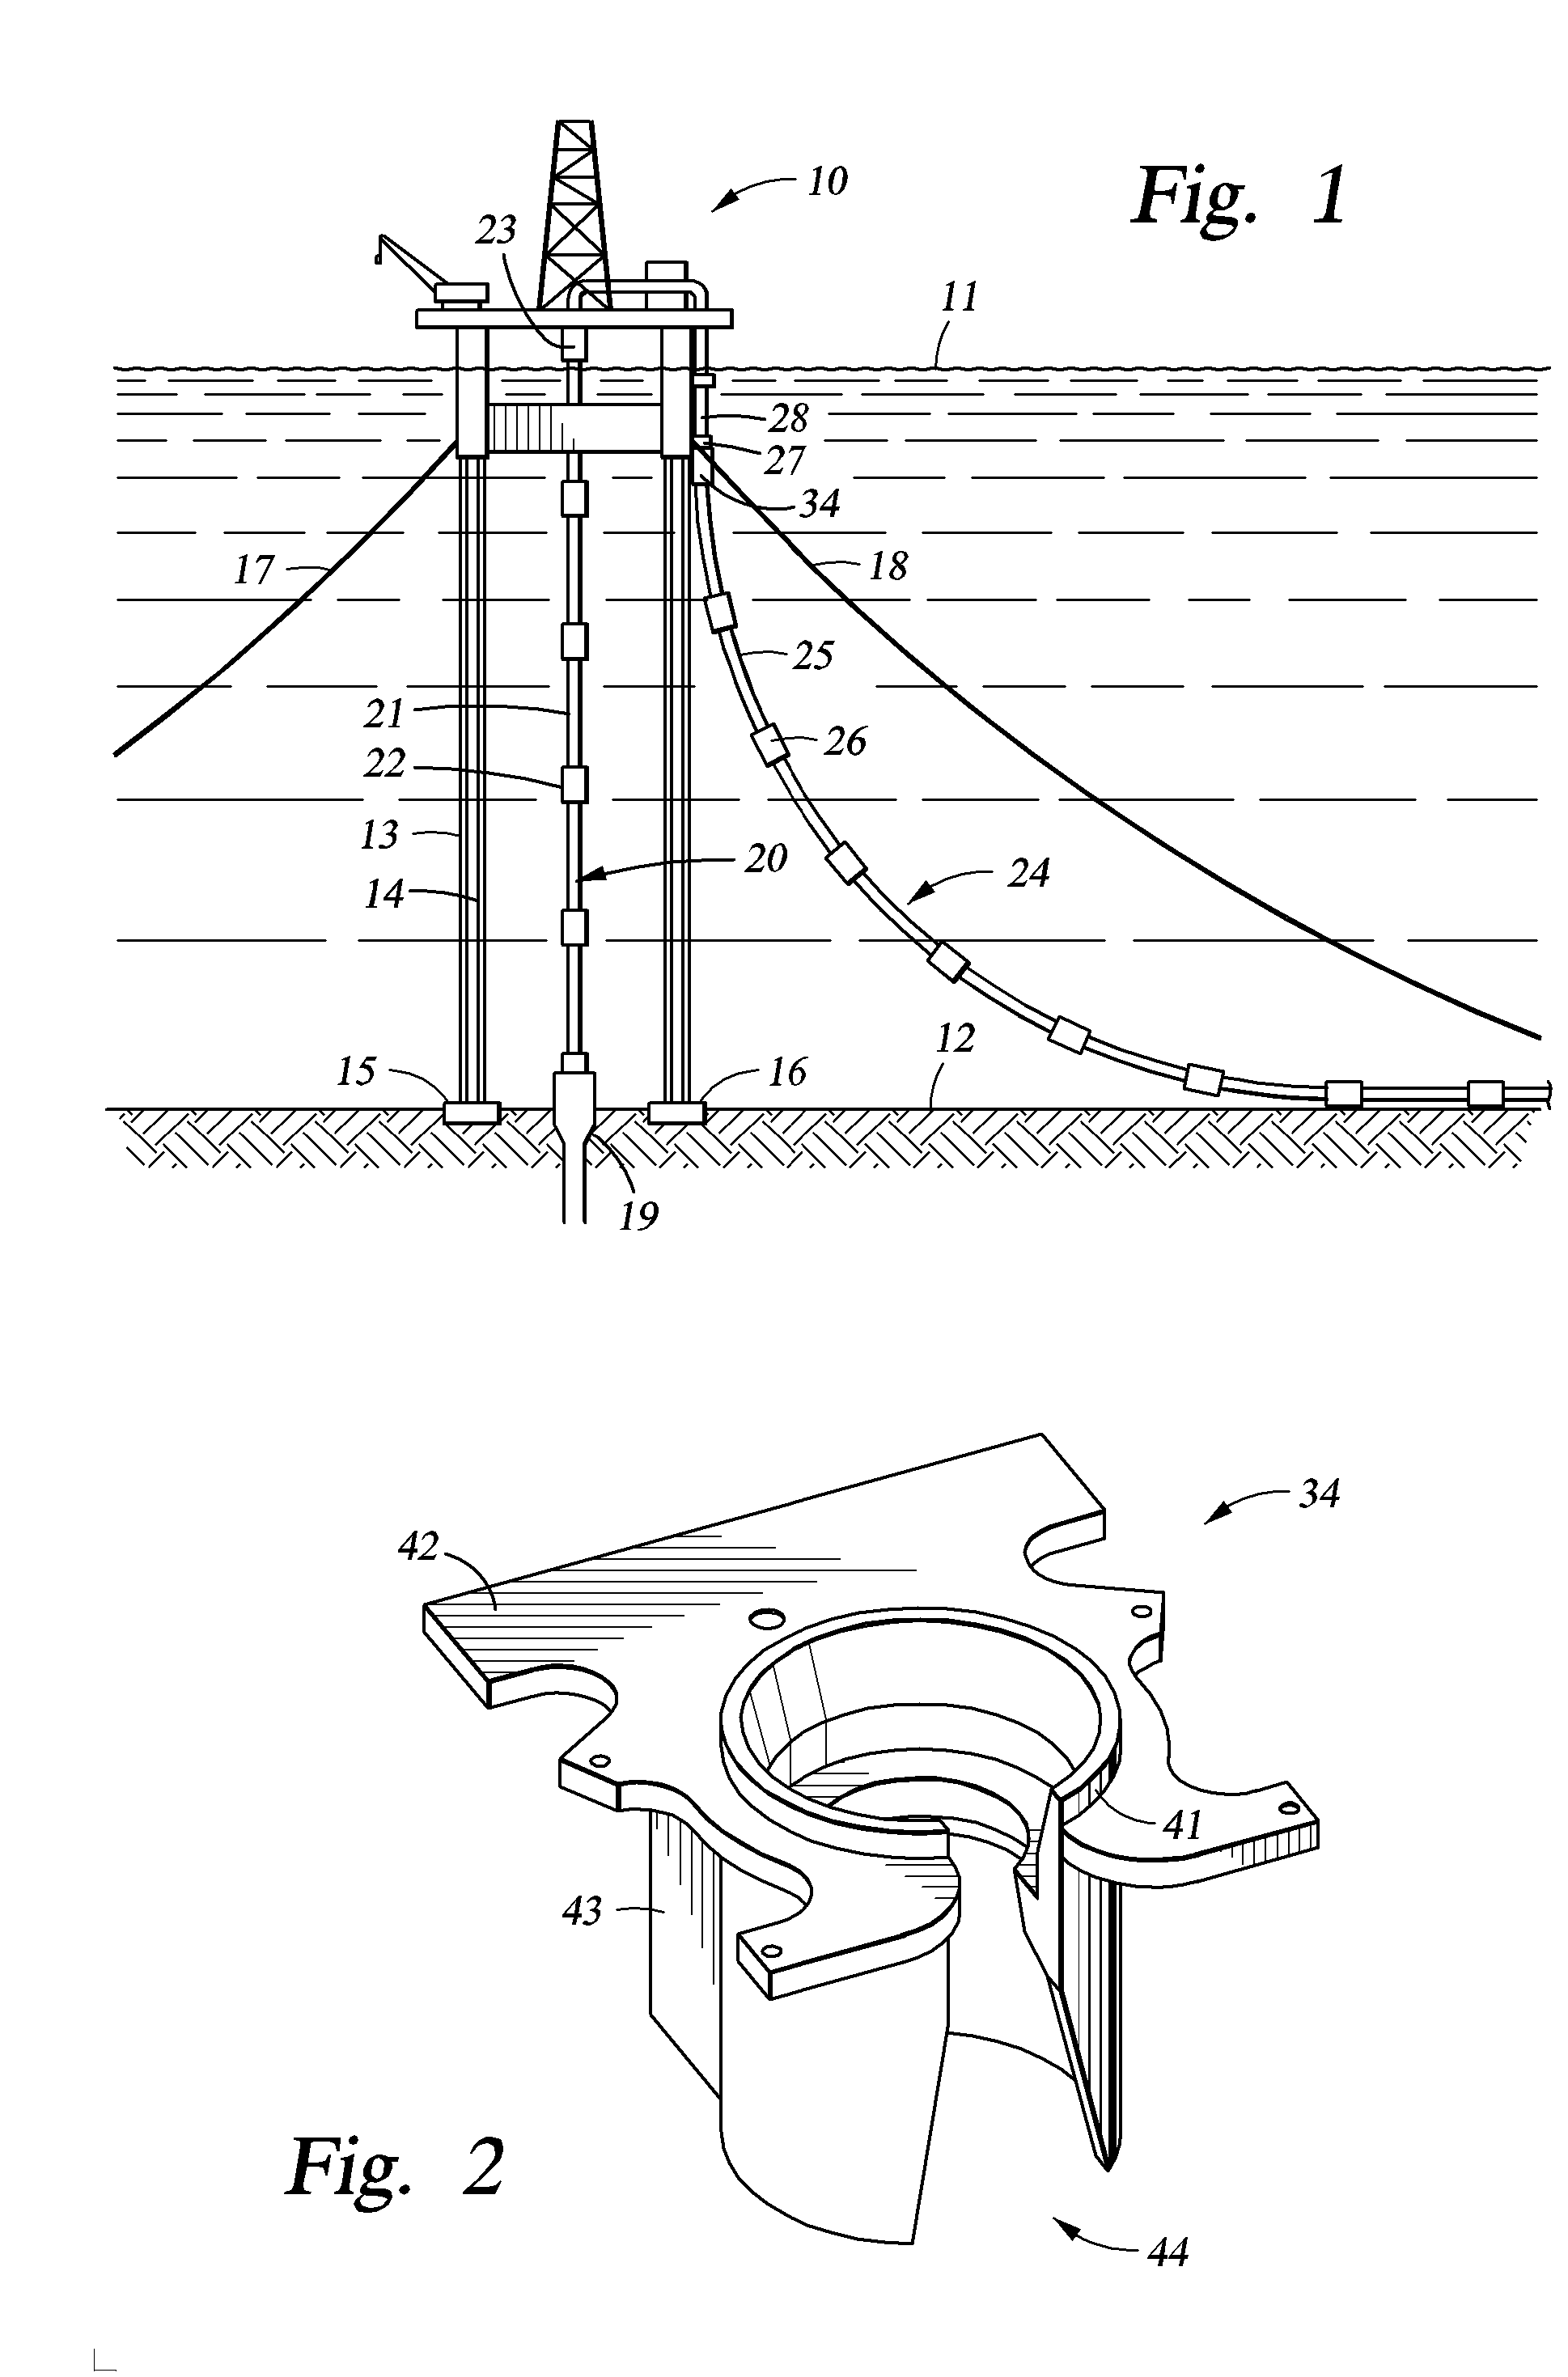 Two-element tandem flexible joint